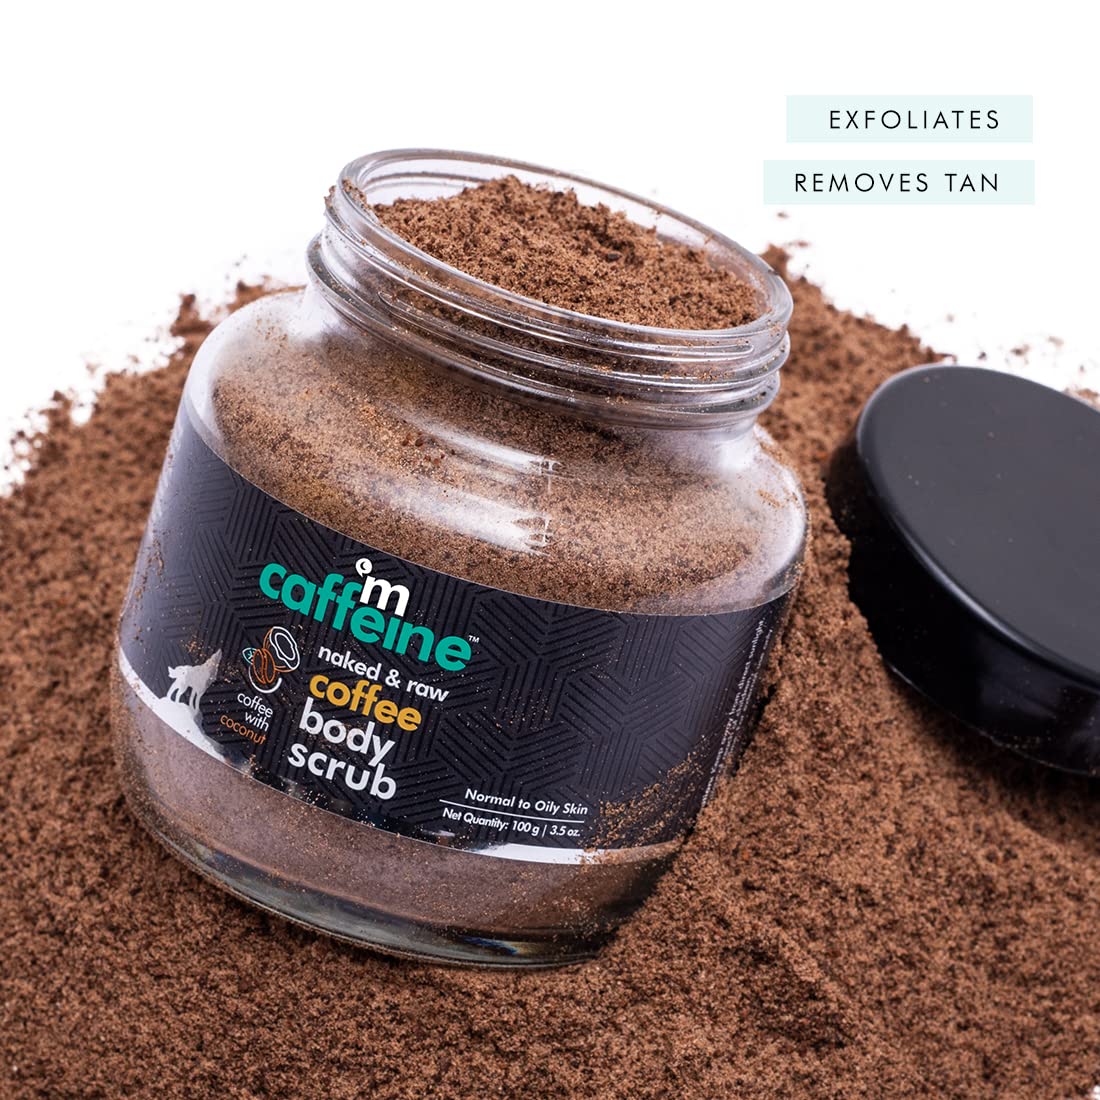 mCaffeine Exfoliating Coffee Body Scrub for Tan Removal & Soft-Smooth Skin | For Women & Men | De-Tan Bathing Scrub with Coconut Oil, Removes Dirt & Dead Skin from Neck, Knees, Elbows & Arms - 3.5 oz